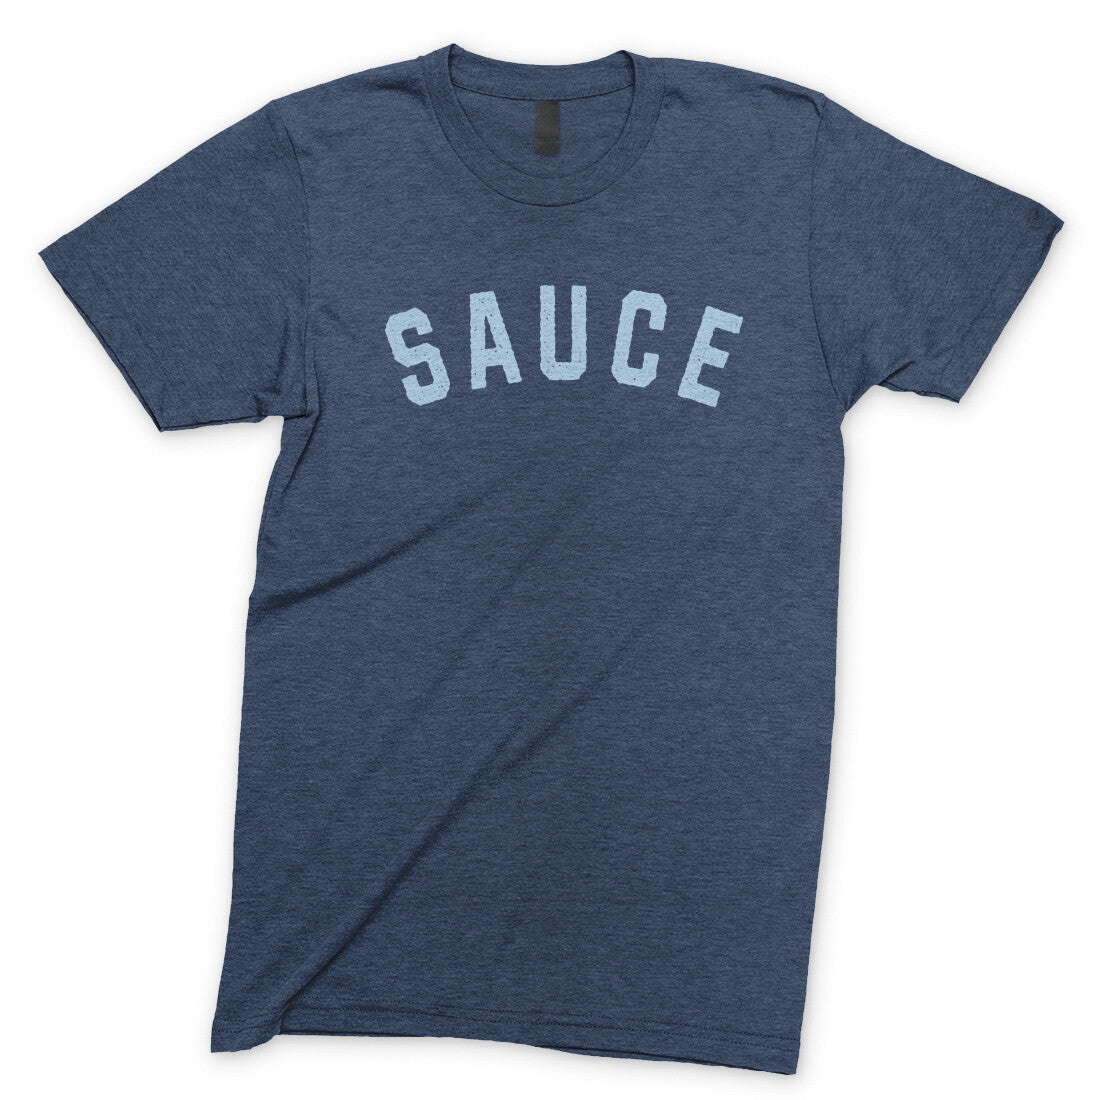 Sauce in Navy Heather Color